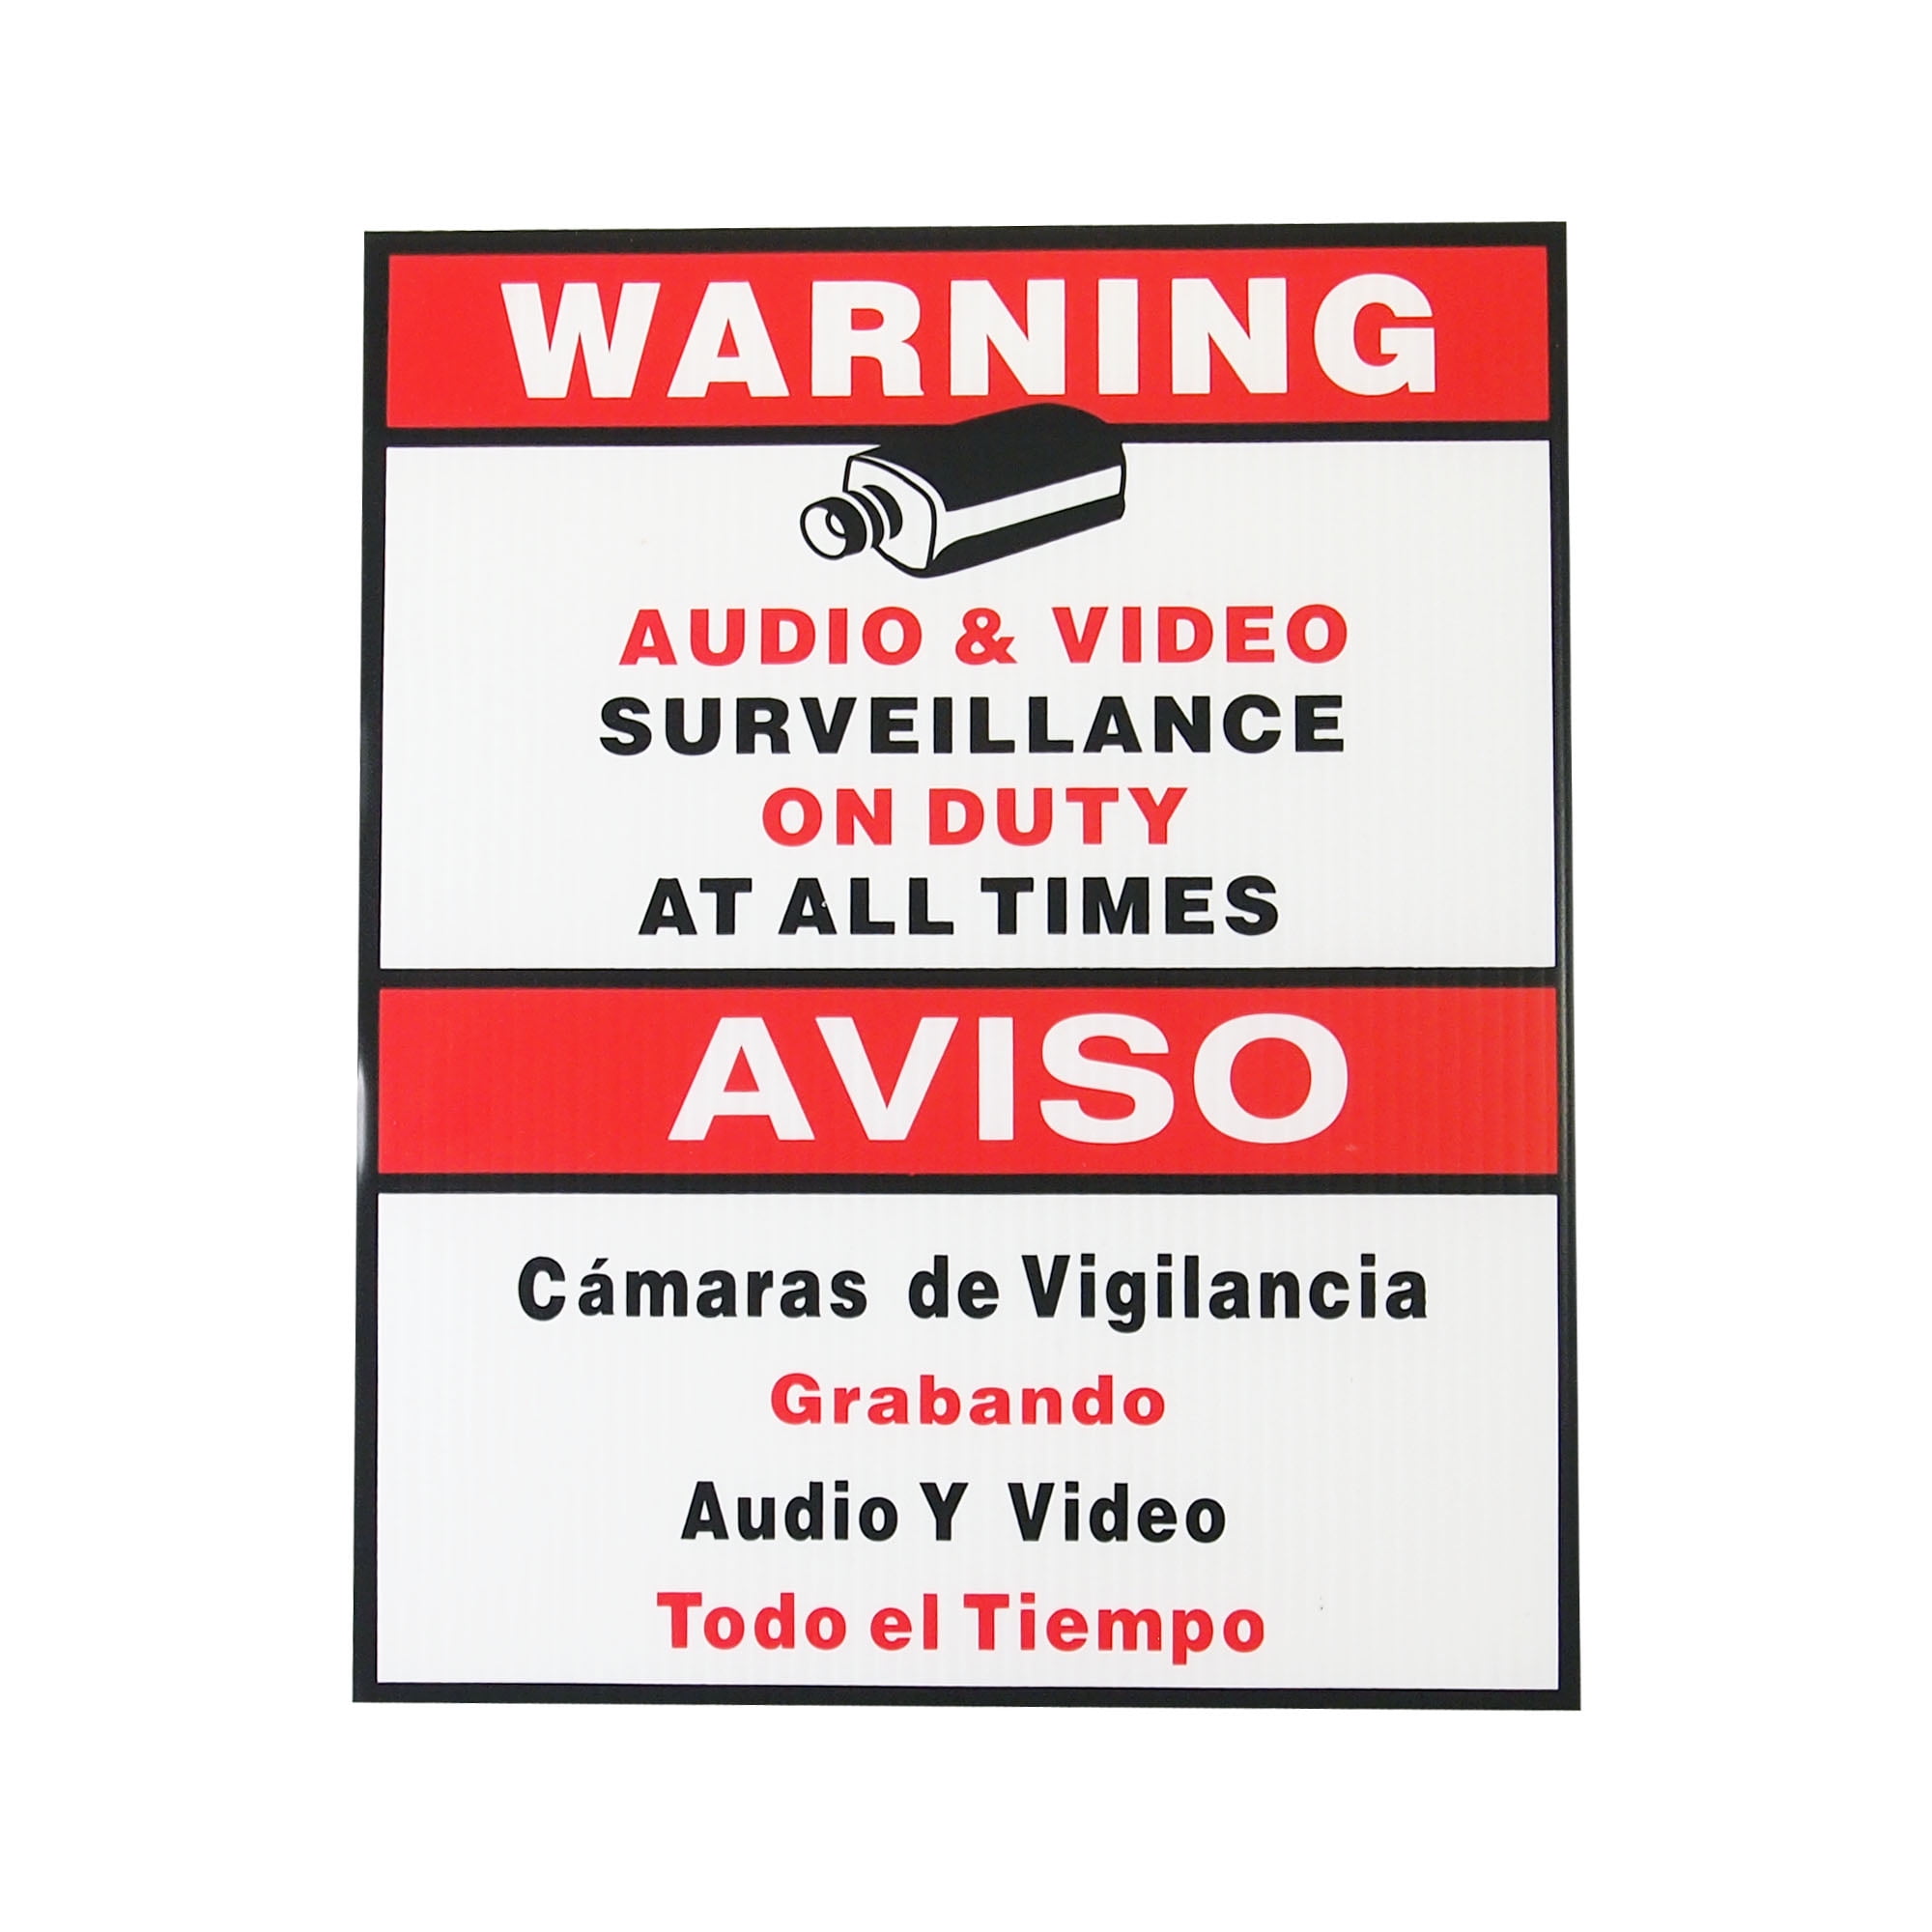 Security Surveillance Warning 24 Hr Sign 8x12 Spanish Eng  BUY 3 OR MORE 25% OFF 